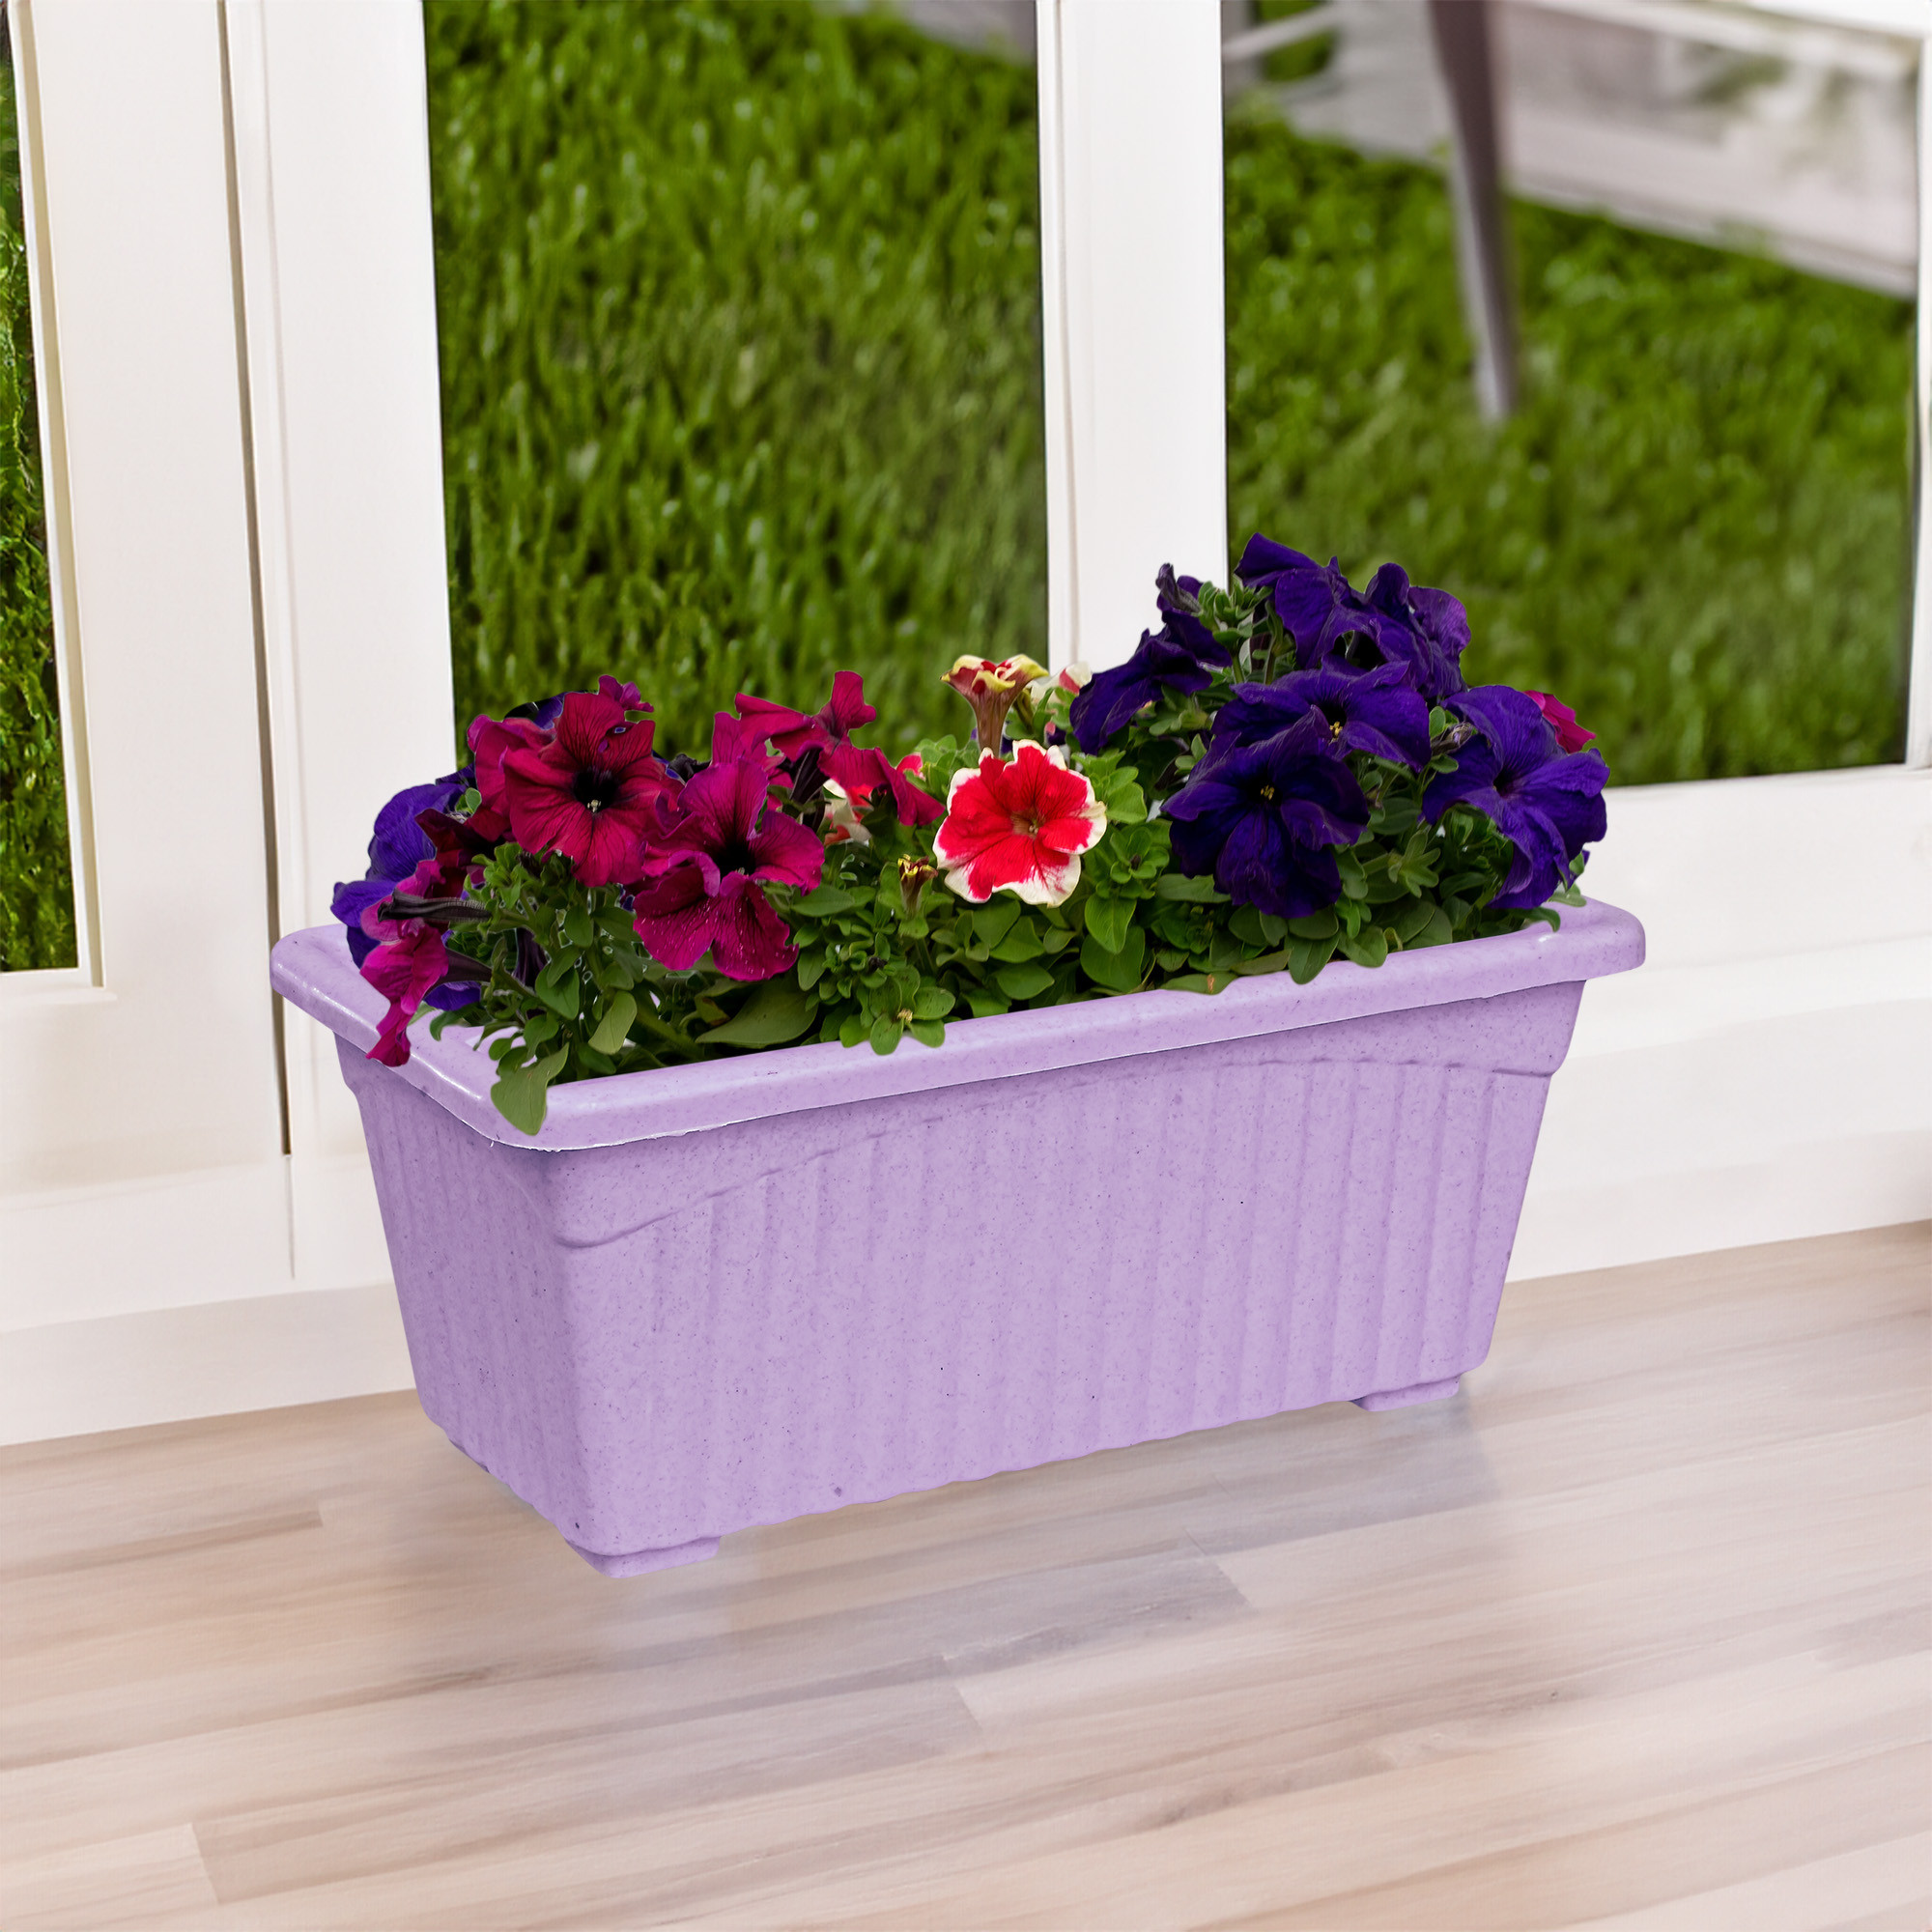 Kuber Industries Flower Pot | Flower Pot for Living Room-Office | Planters for Home-Lawns & Gardening | Window Flower Pots for Balcony | Marble Jupitar | Purple & Peach